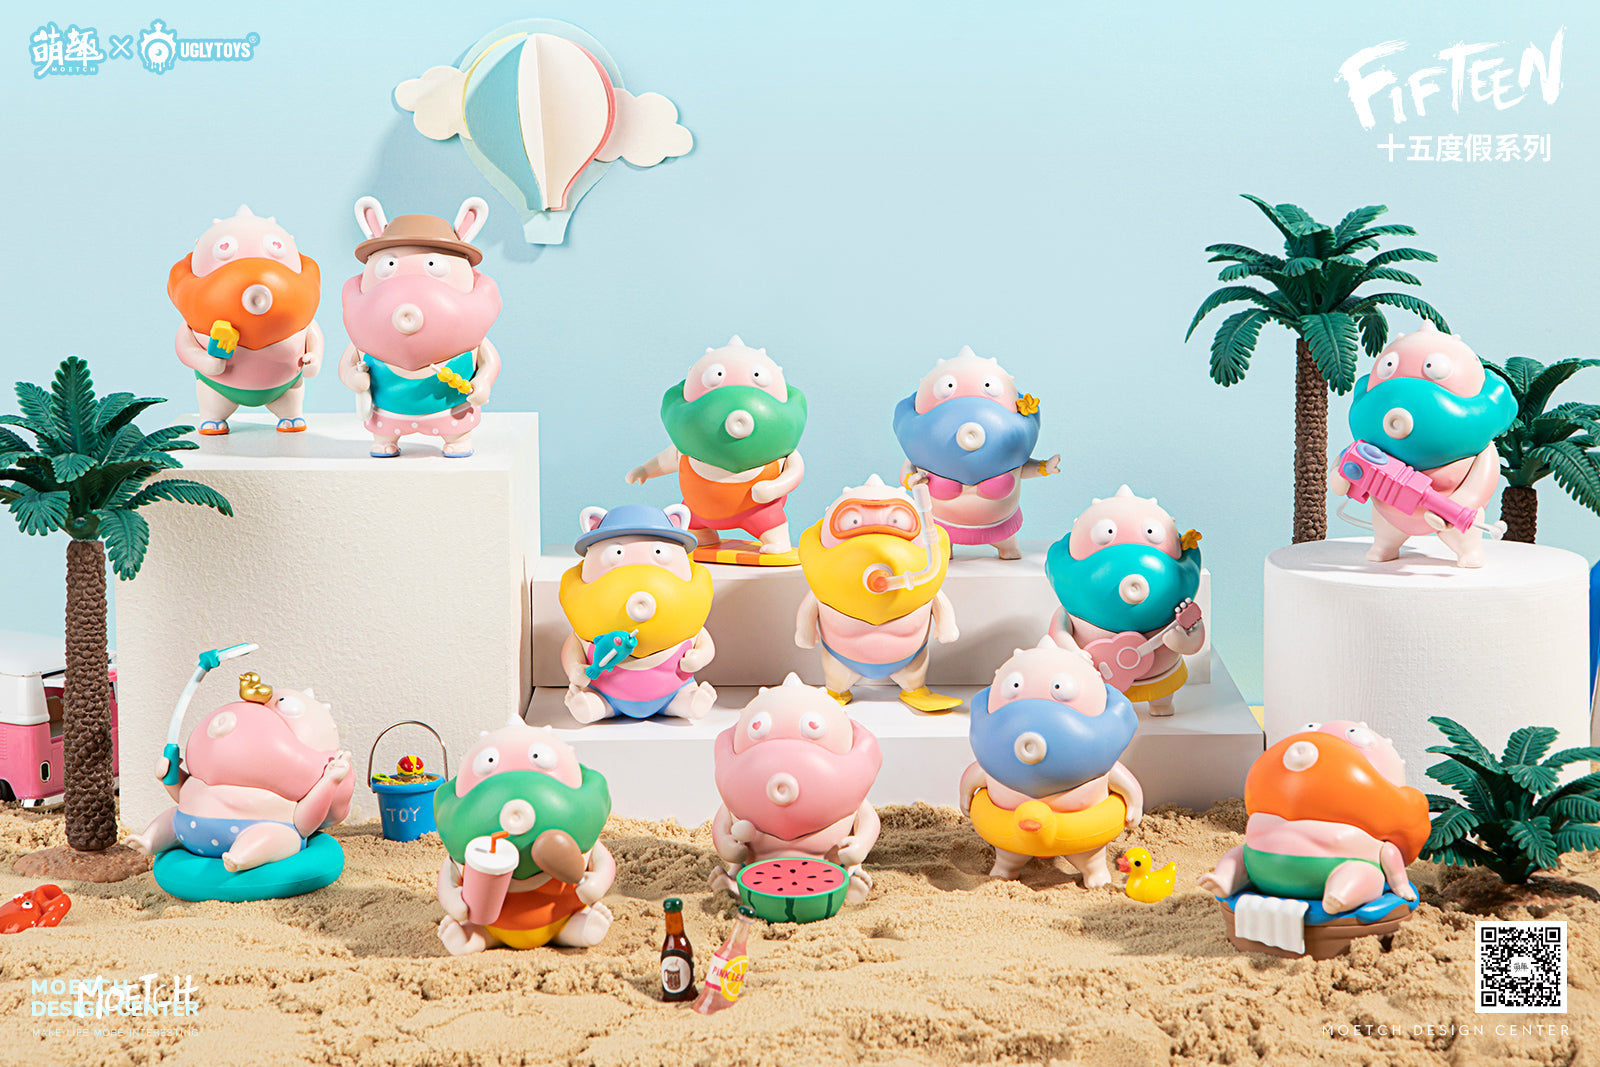 Fifteen Blindbox Series by Ugly Toys x Moetch